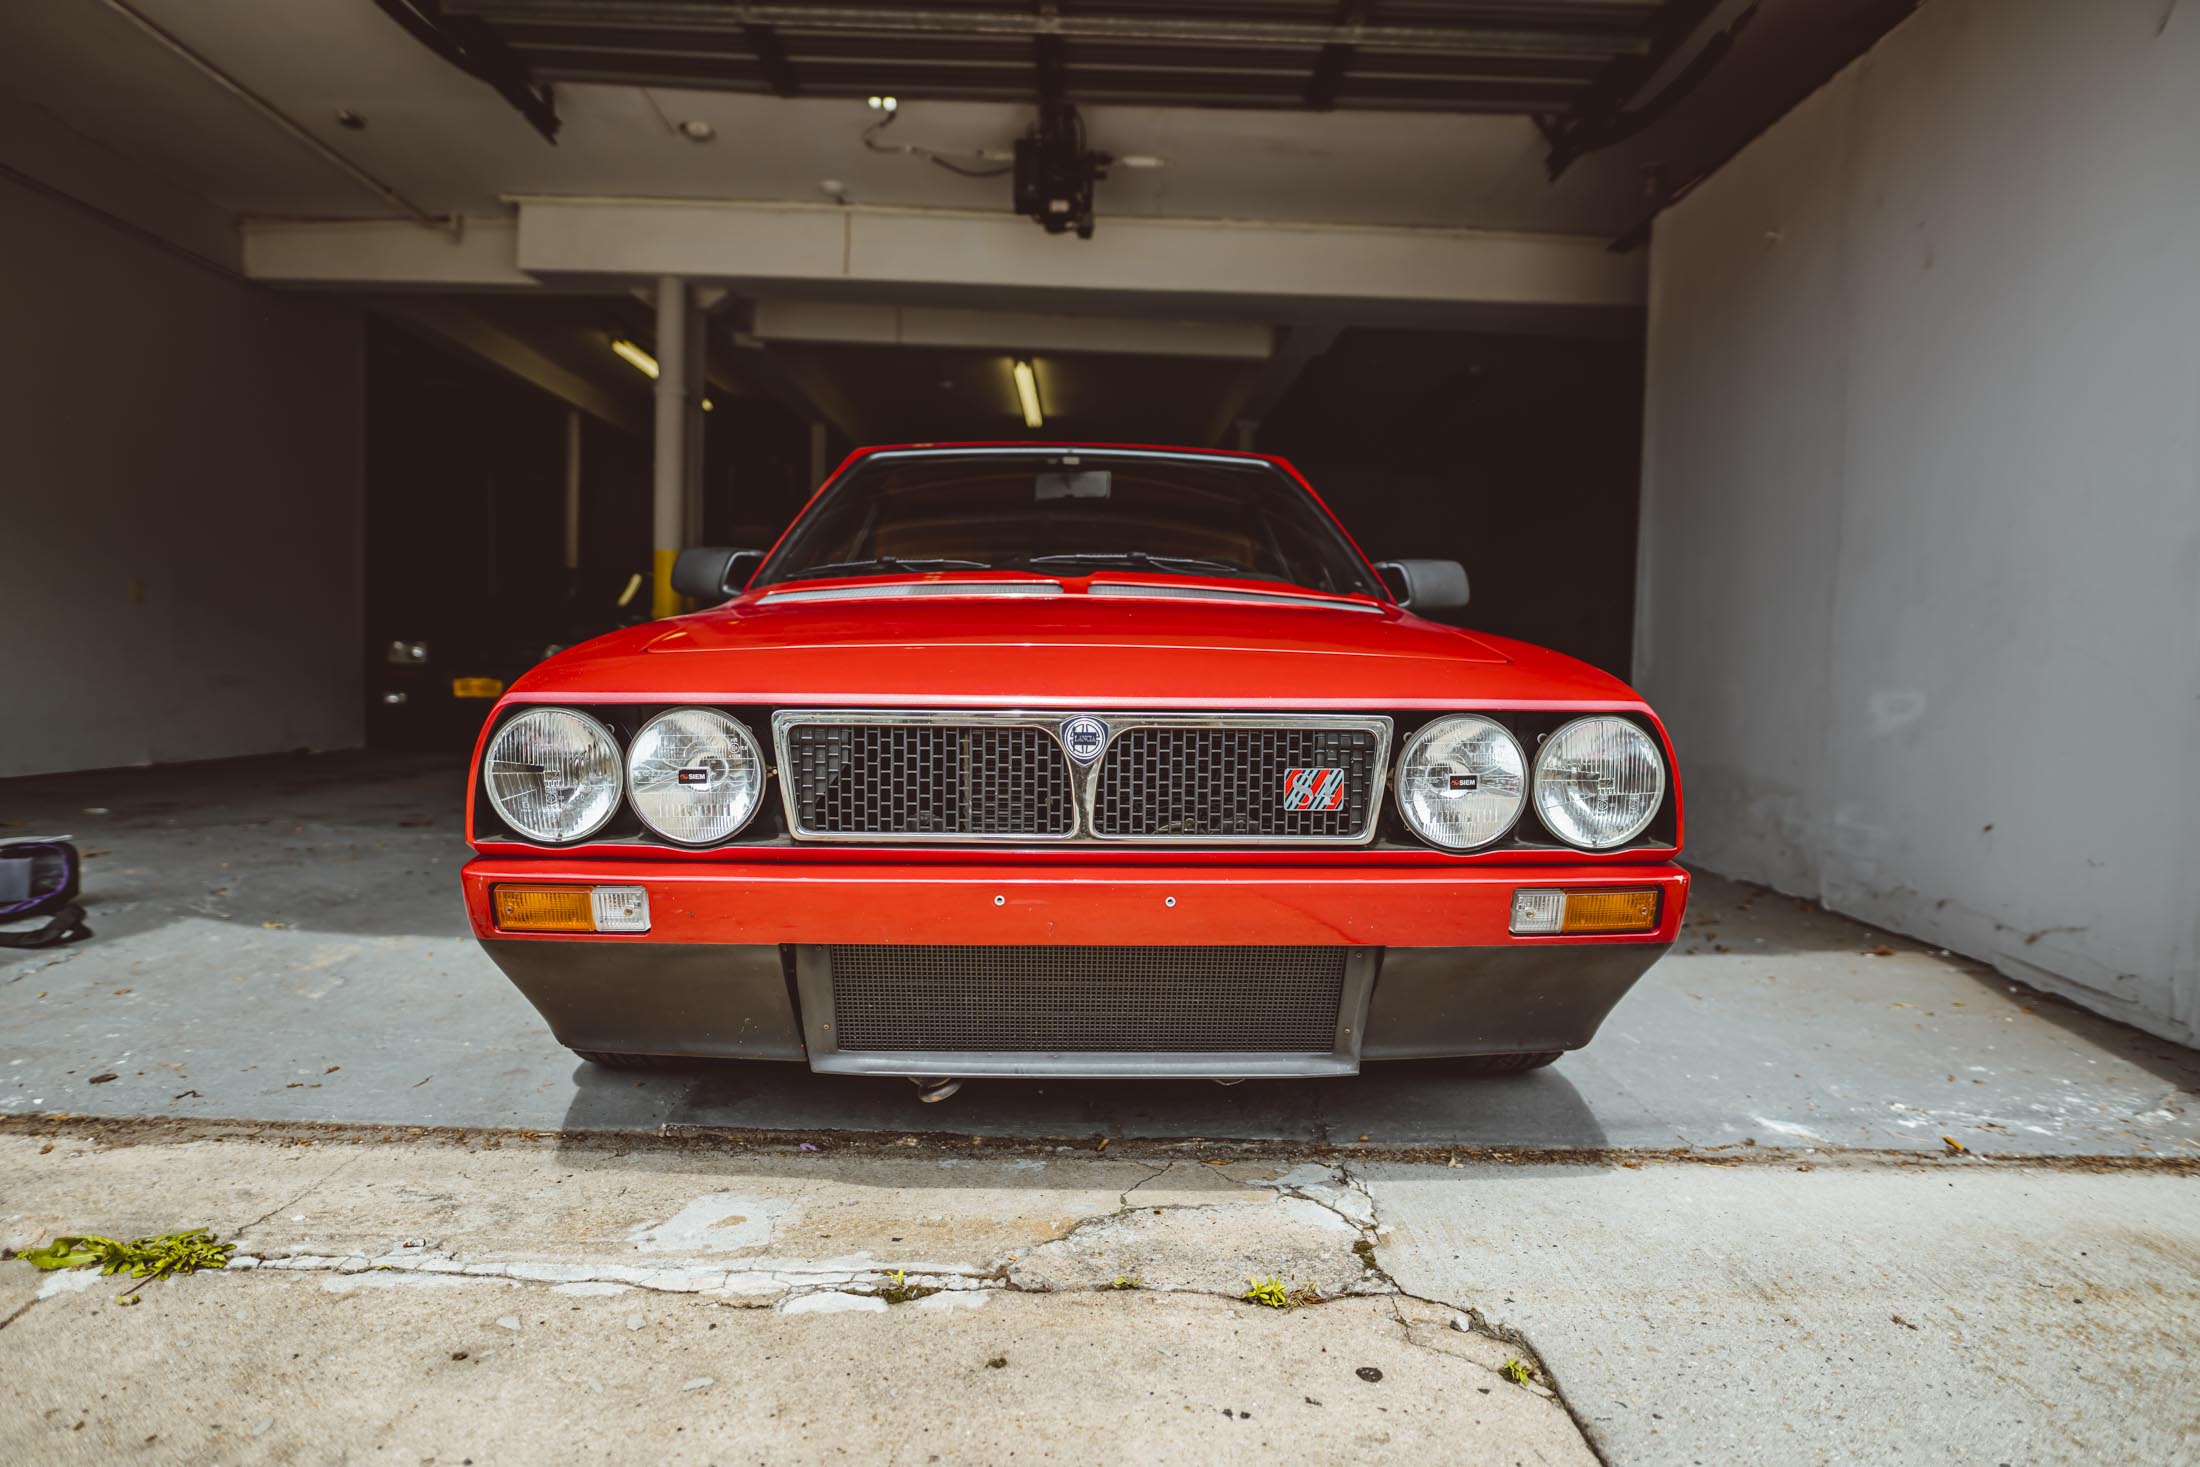 Ugly Old Lancia Delta S4 Worth $1 Million on Classic Car Market - Bloomberg